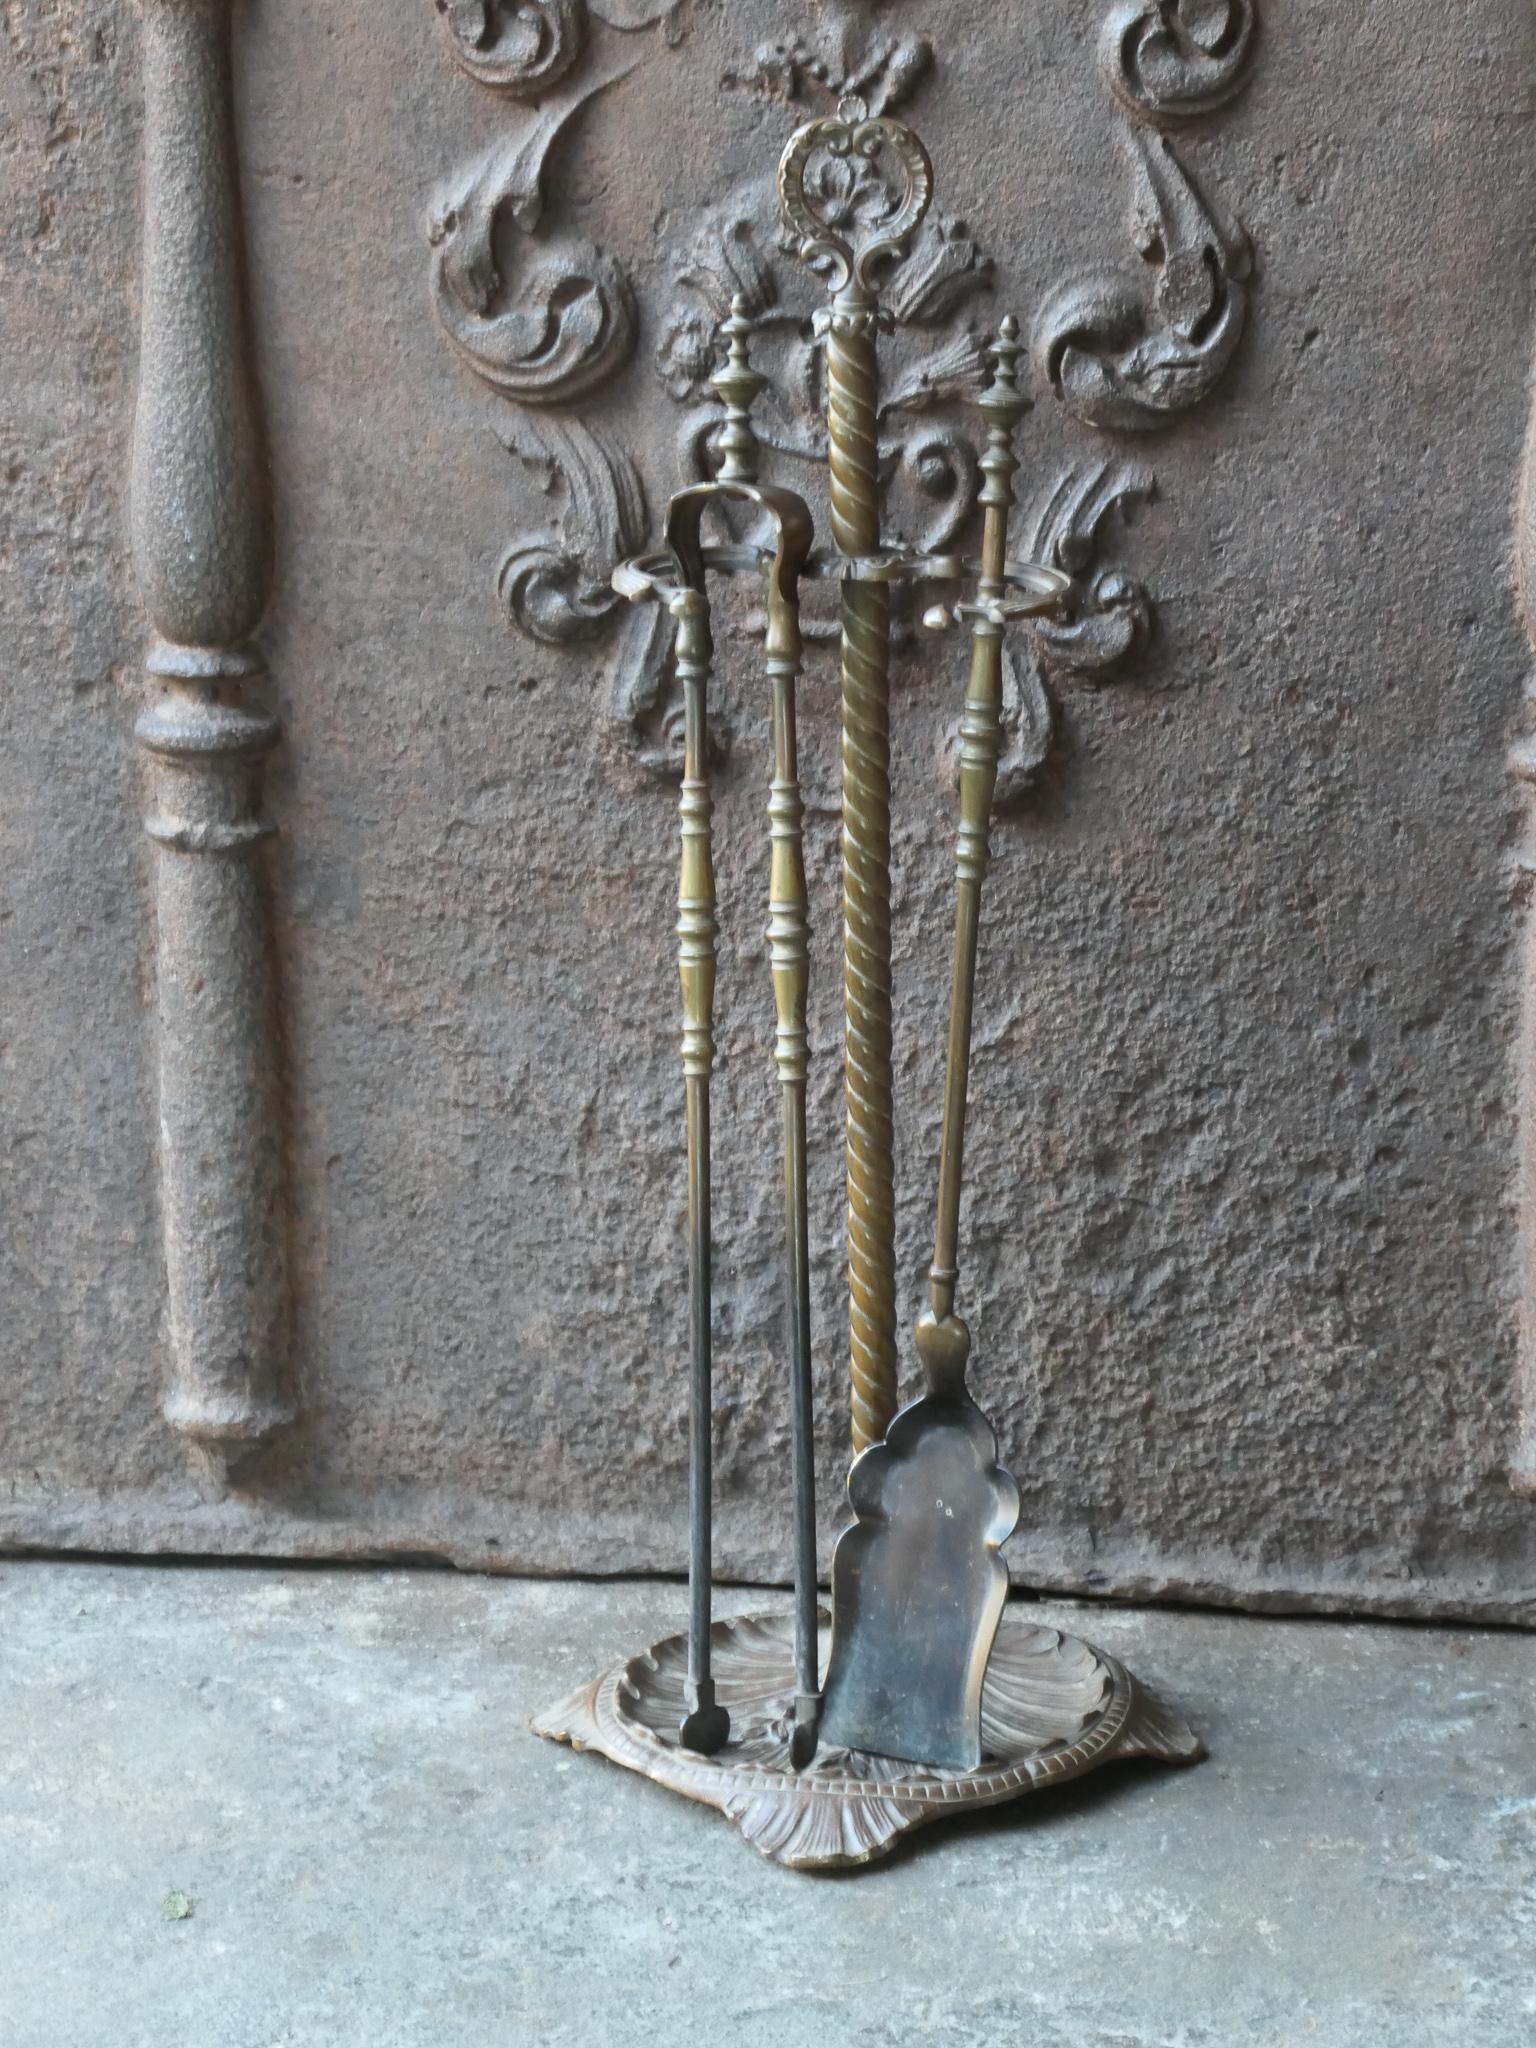 19th Century French Napoleon III period fire companion set. The tool set consists of thongs, shovel and stand. Made of brass. It is in a good condition and is fully functional.